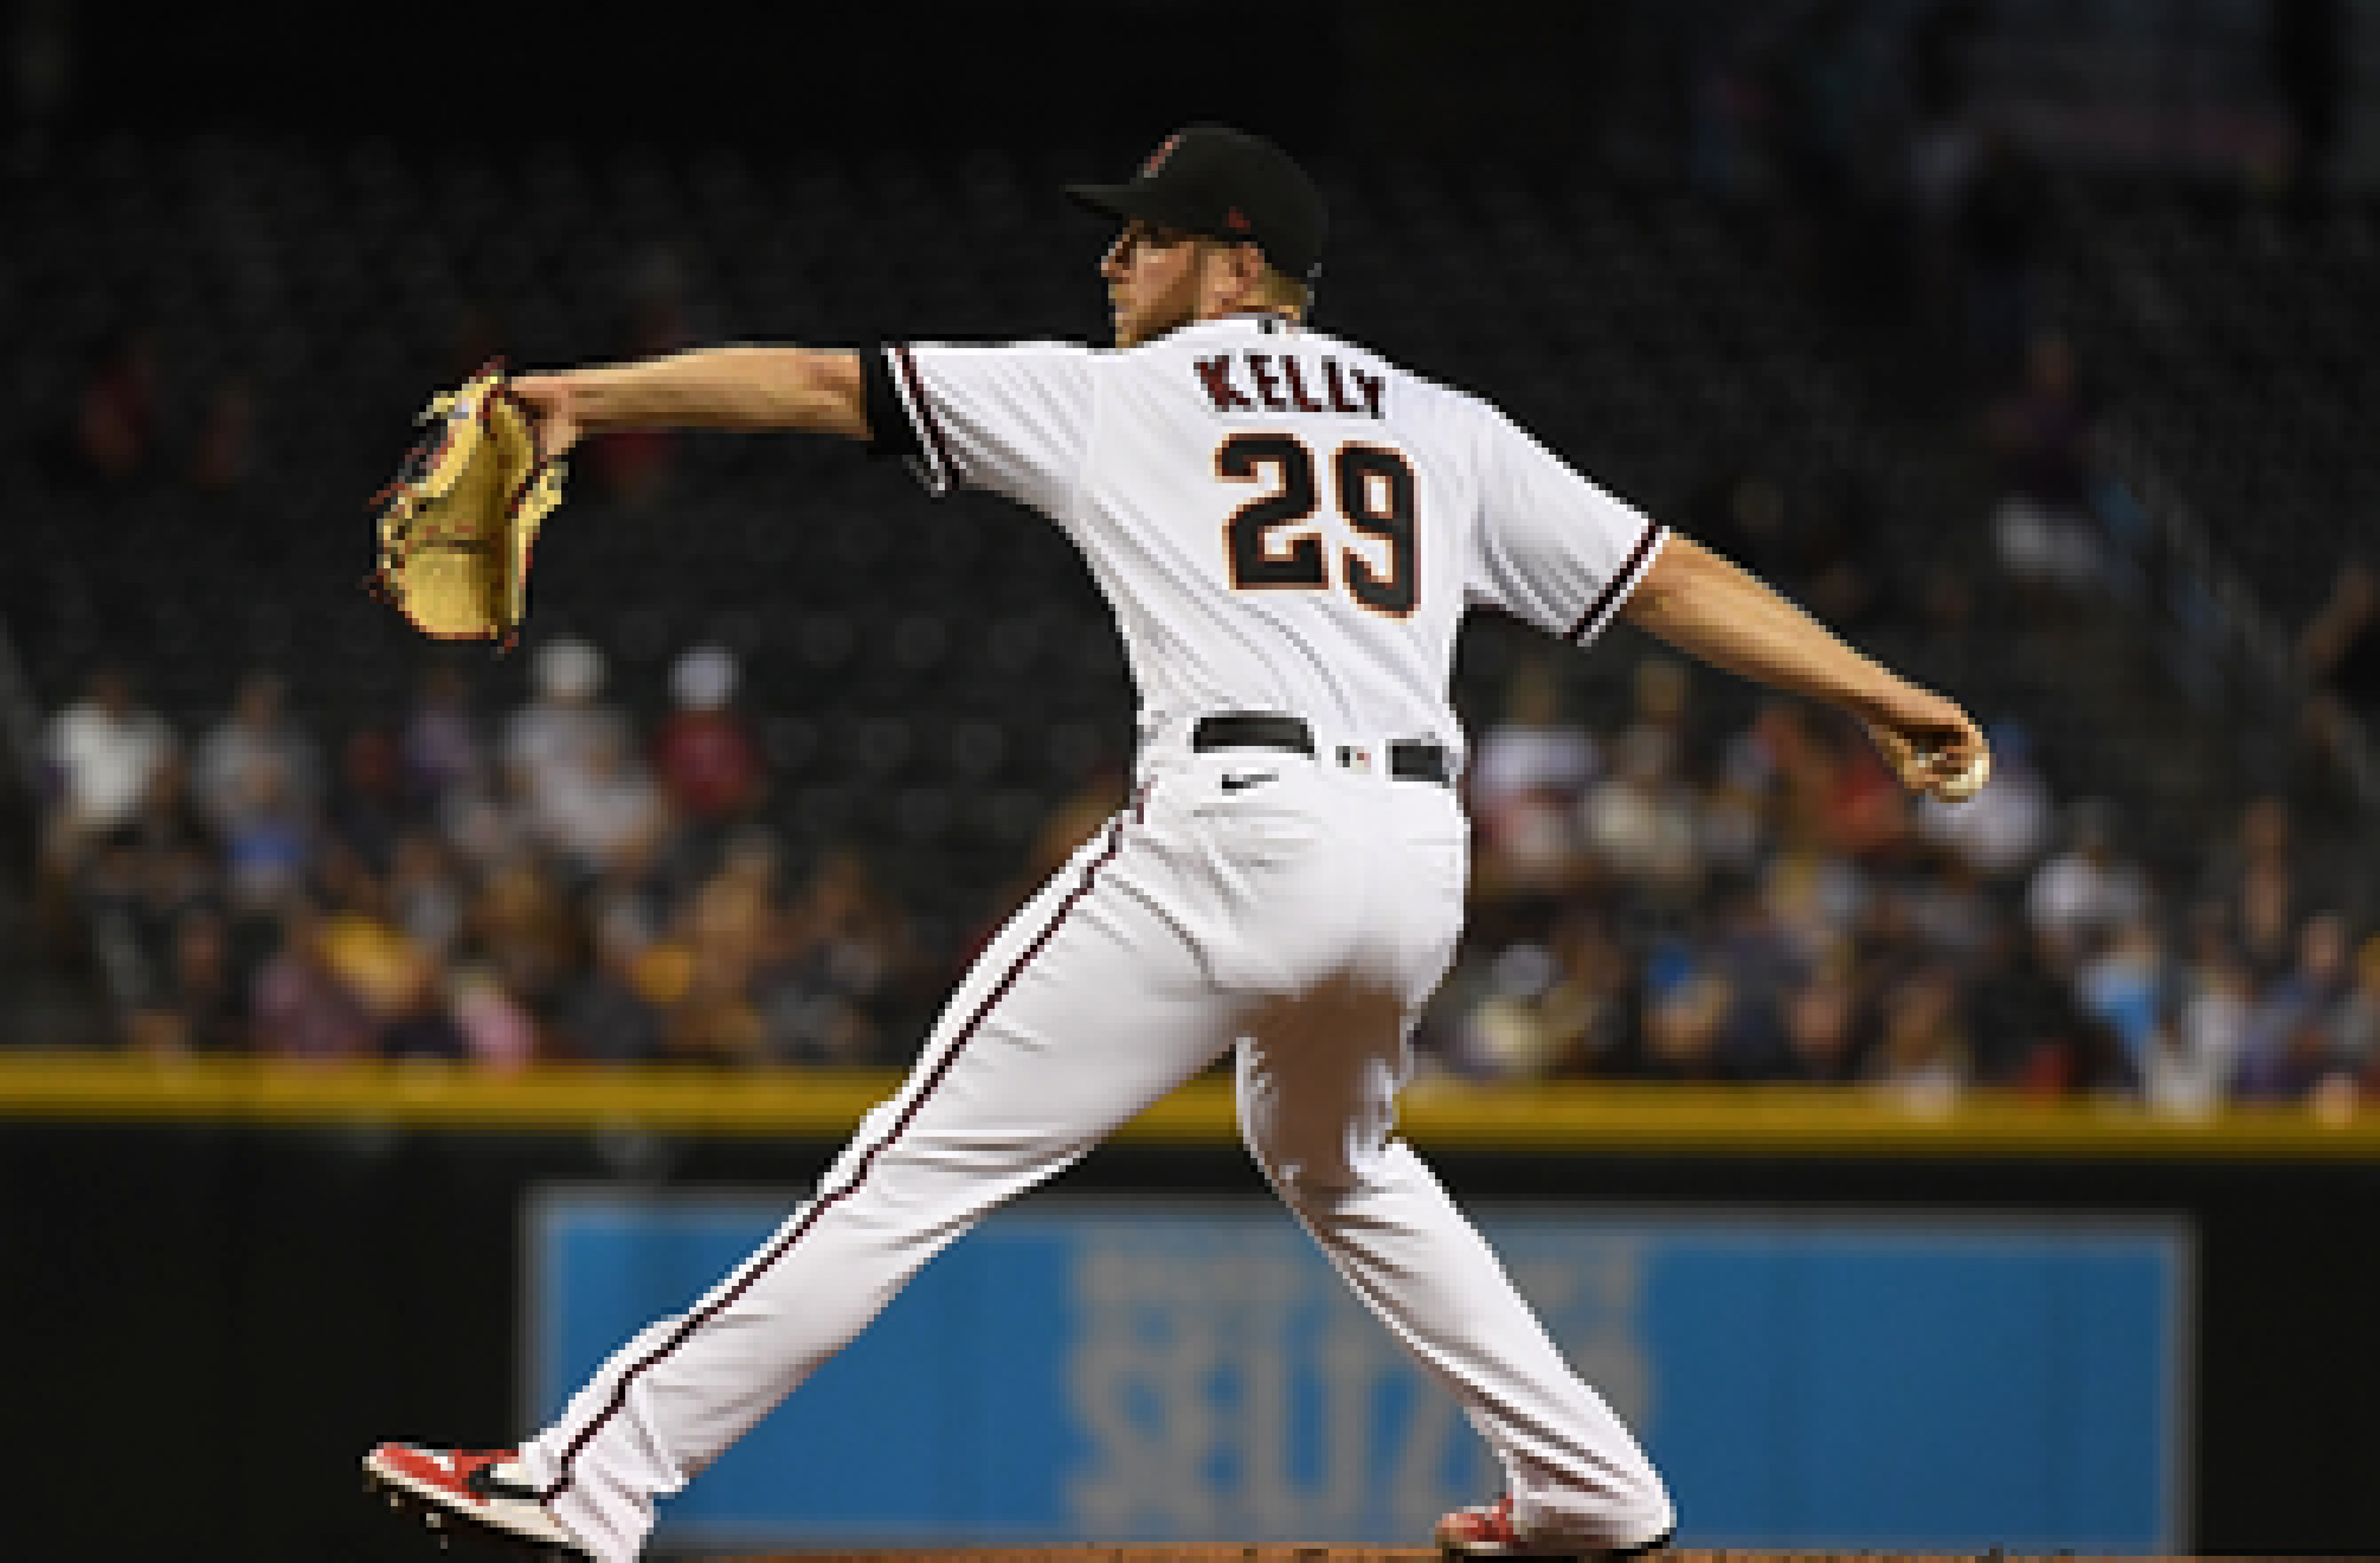 Merrill Kelly spins seven strong as D’Backs snap 17-game losing streak, 5-1 over Brewers